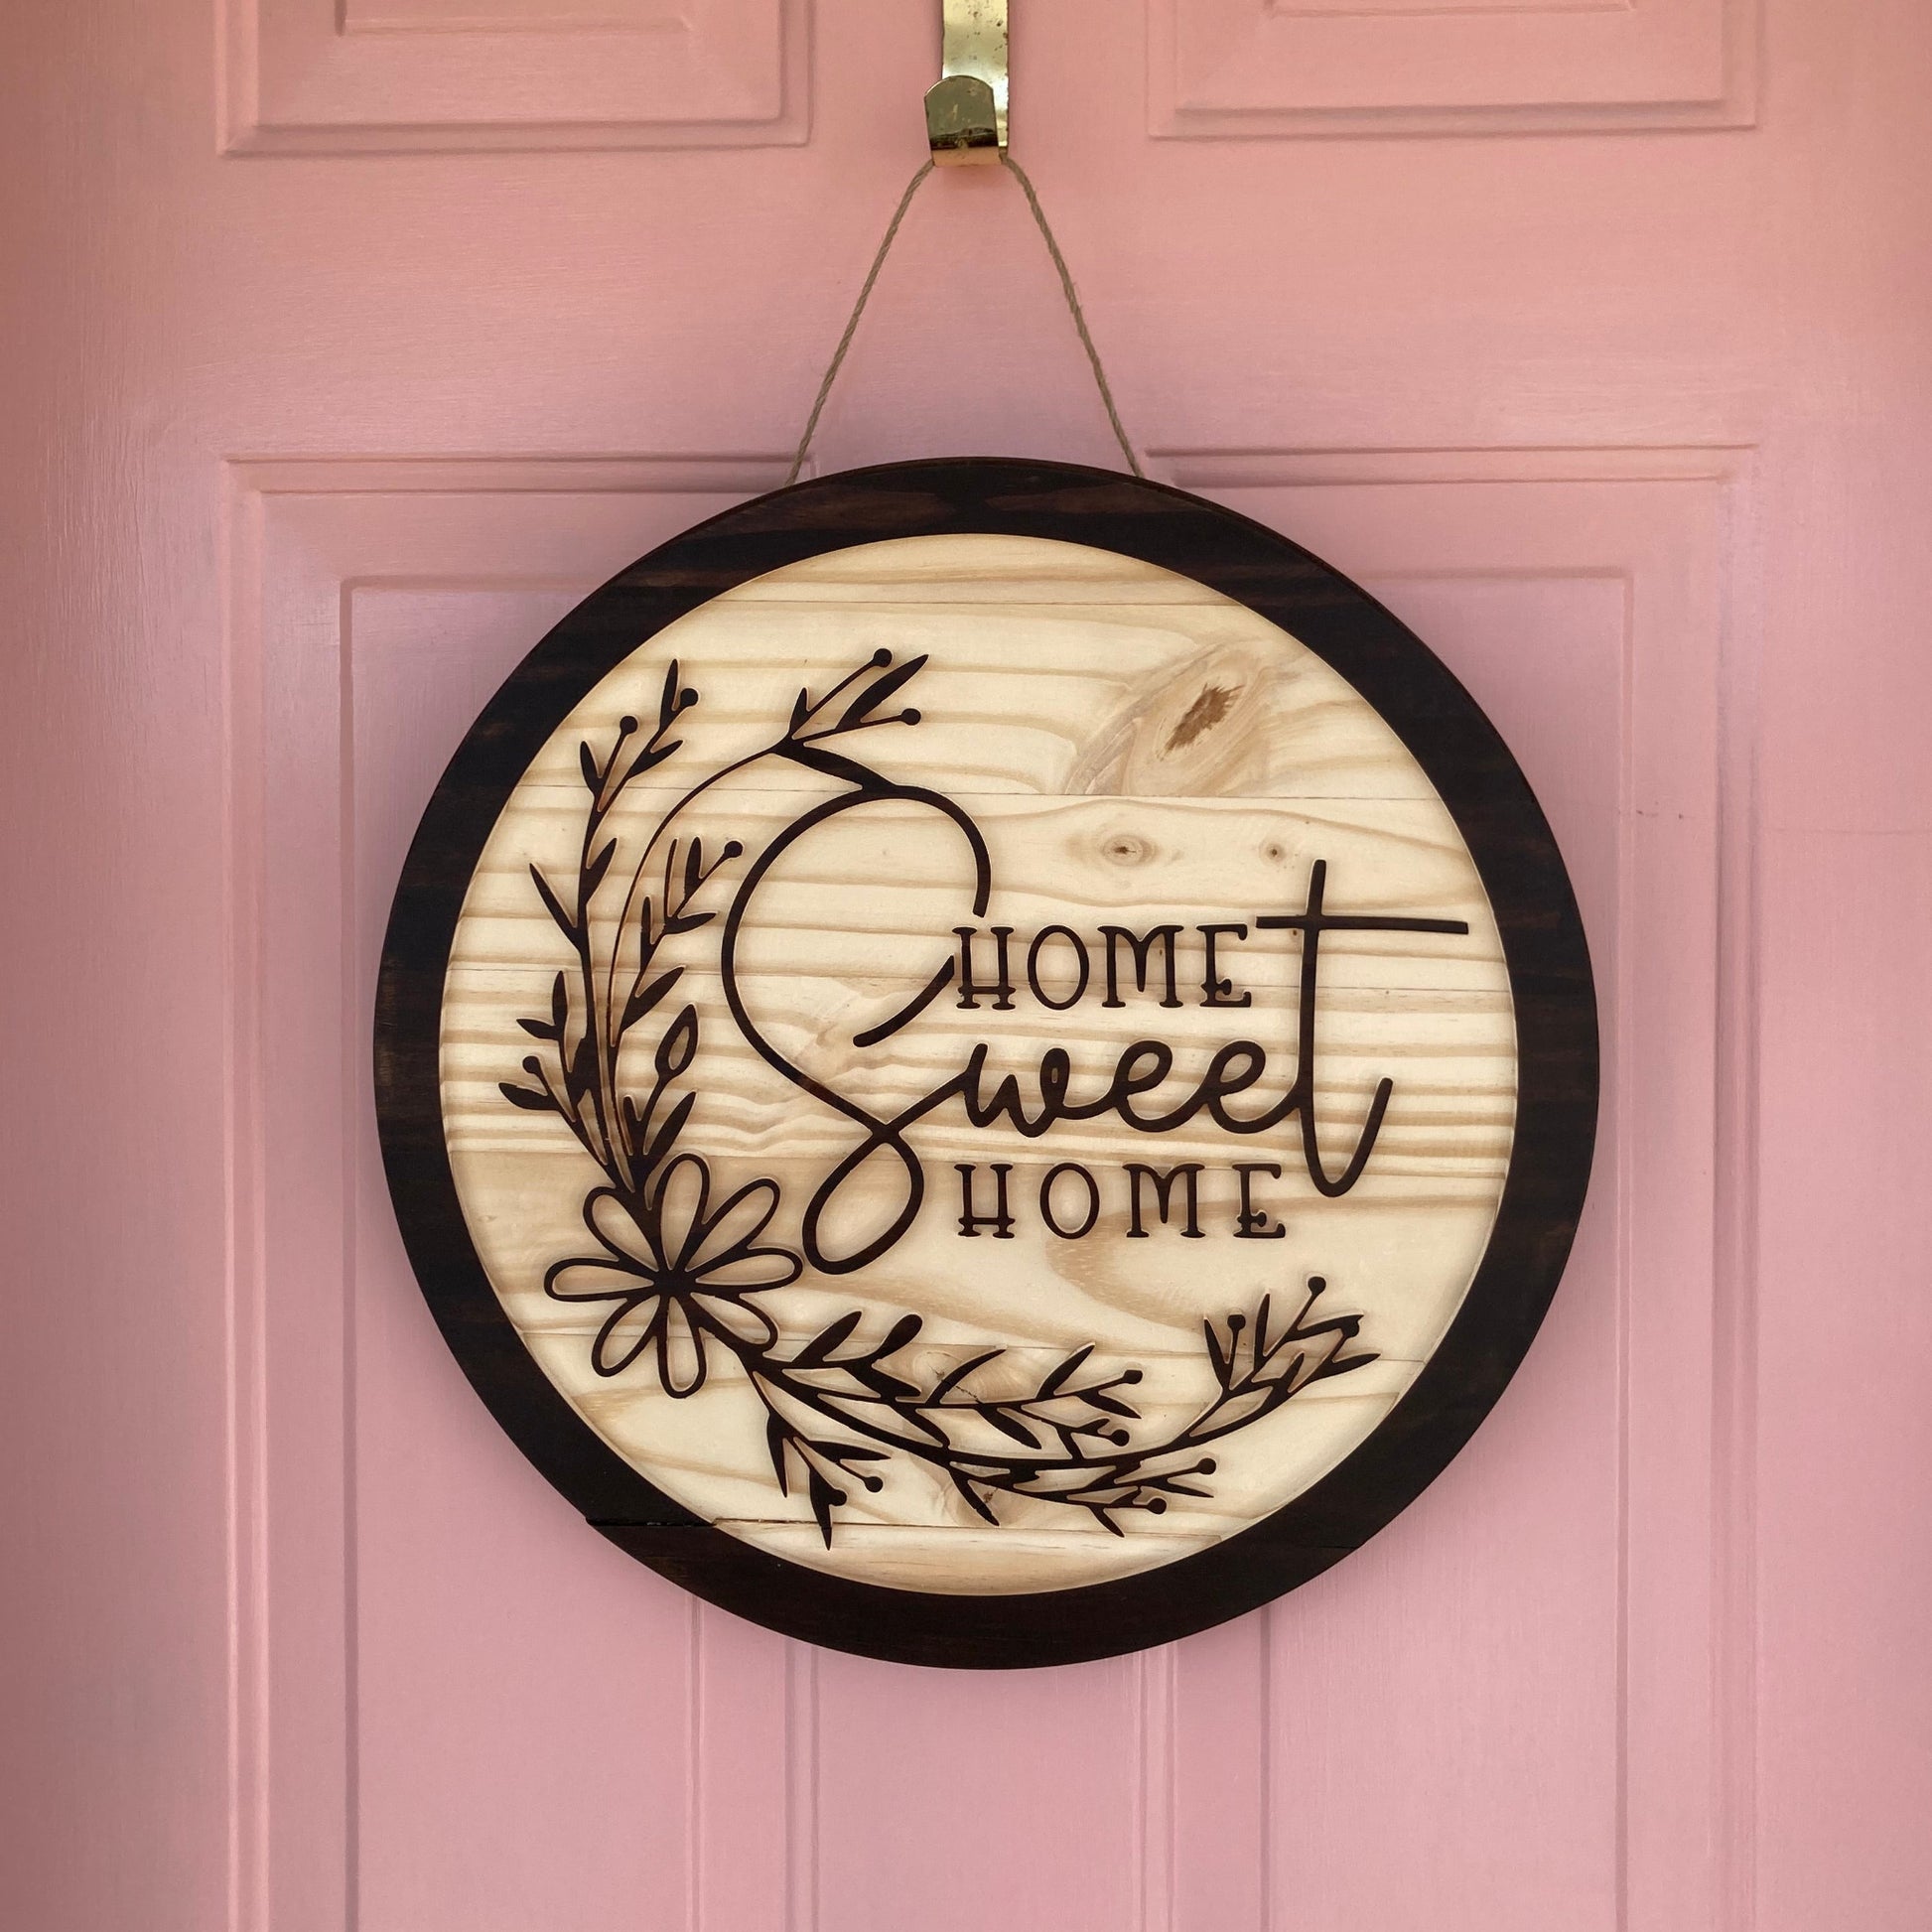 Home Sweet Home Round Wood Sign – Home Branded